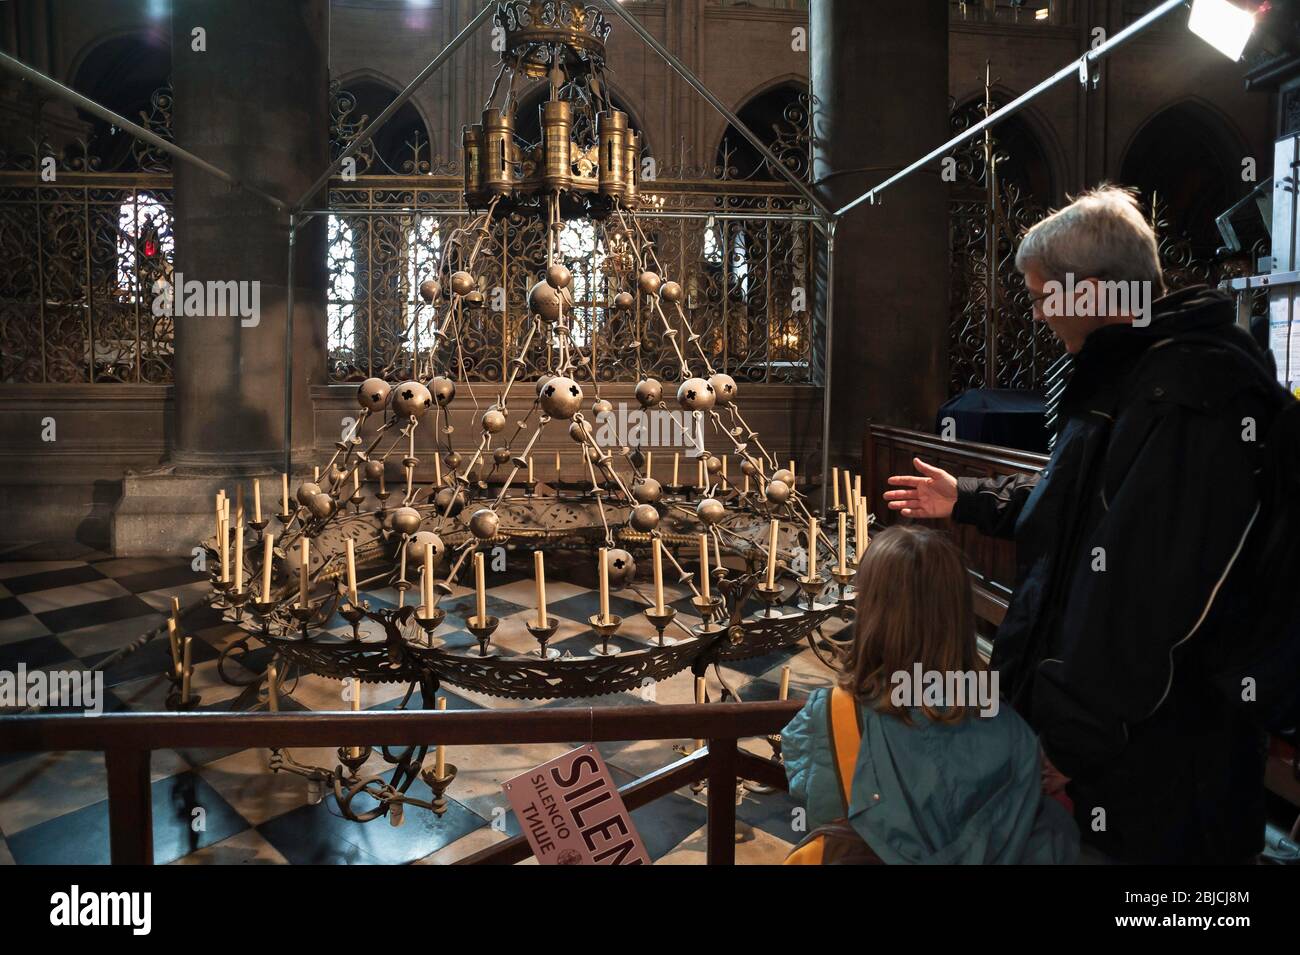 Chandelier Notre Dame Cathedral, a father shows his daughter the Great Chandelier or 'Crown Of Light' inside Notre Dame Cathedral, Paris, France Stock Photo